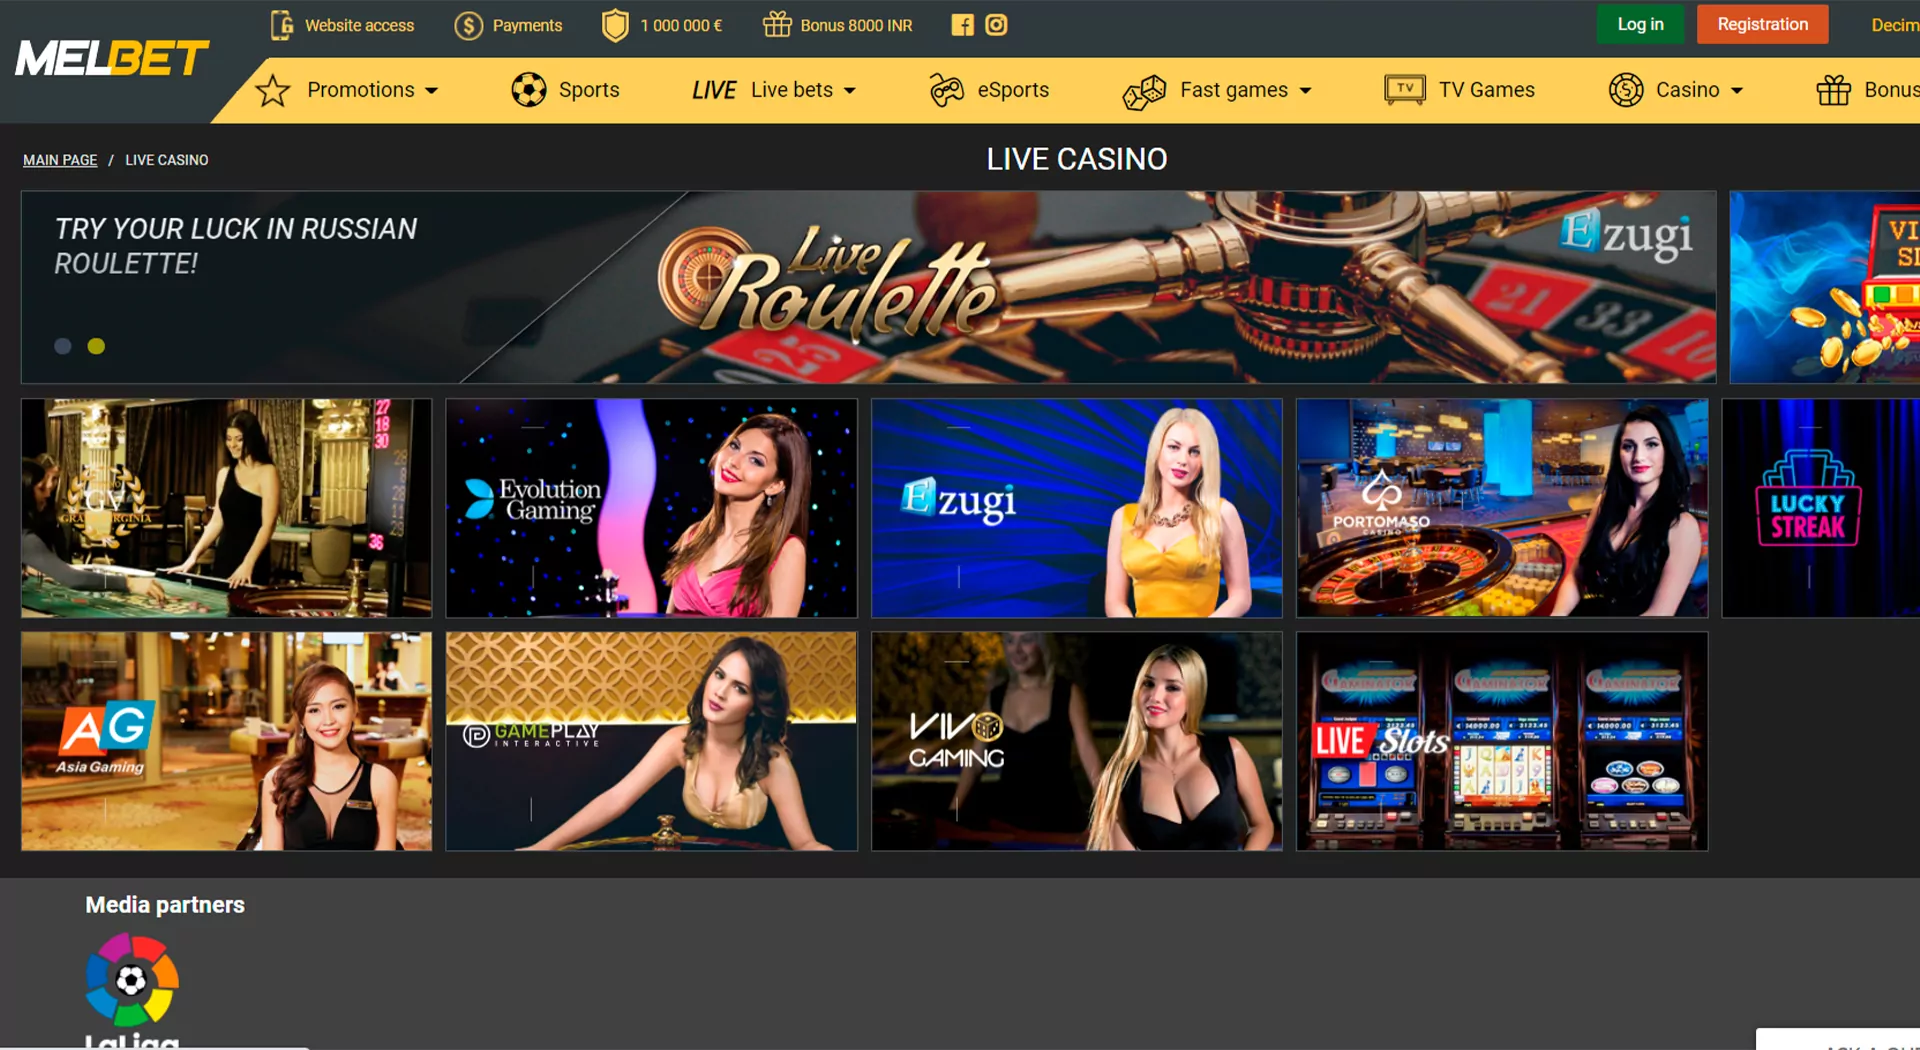 Only verified players over 18 years old can play on money at Melbet Casino.